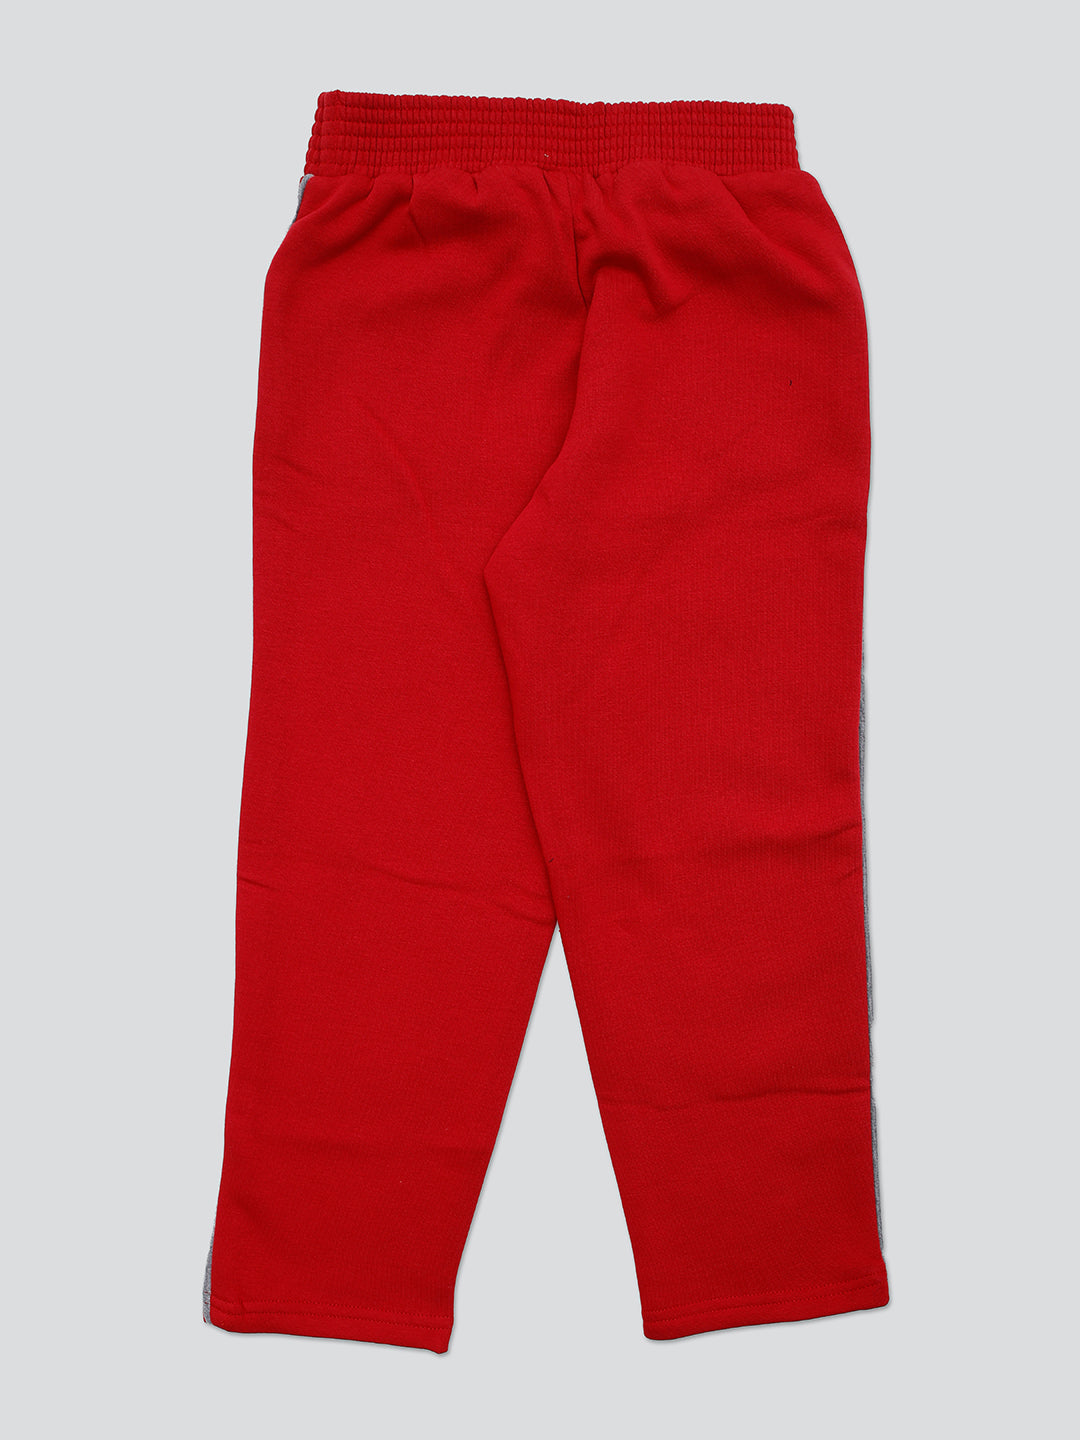 Pampolina Girl Fleece Solid  Lower- Red